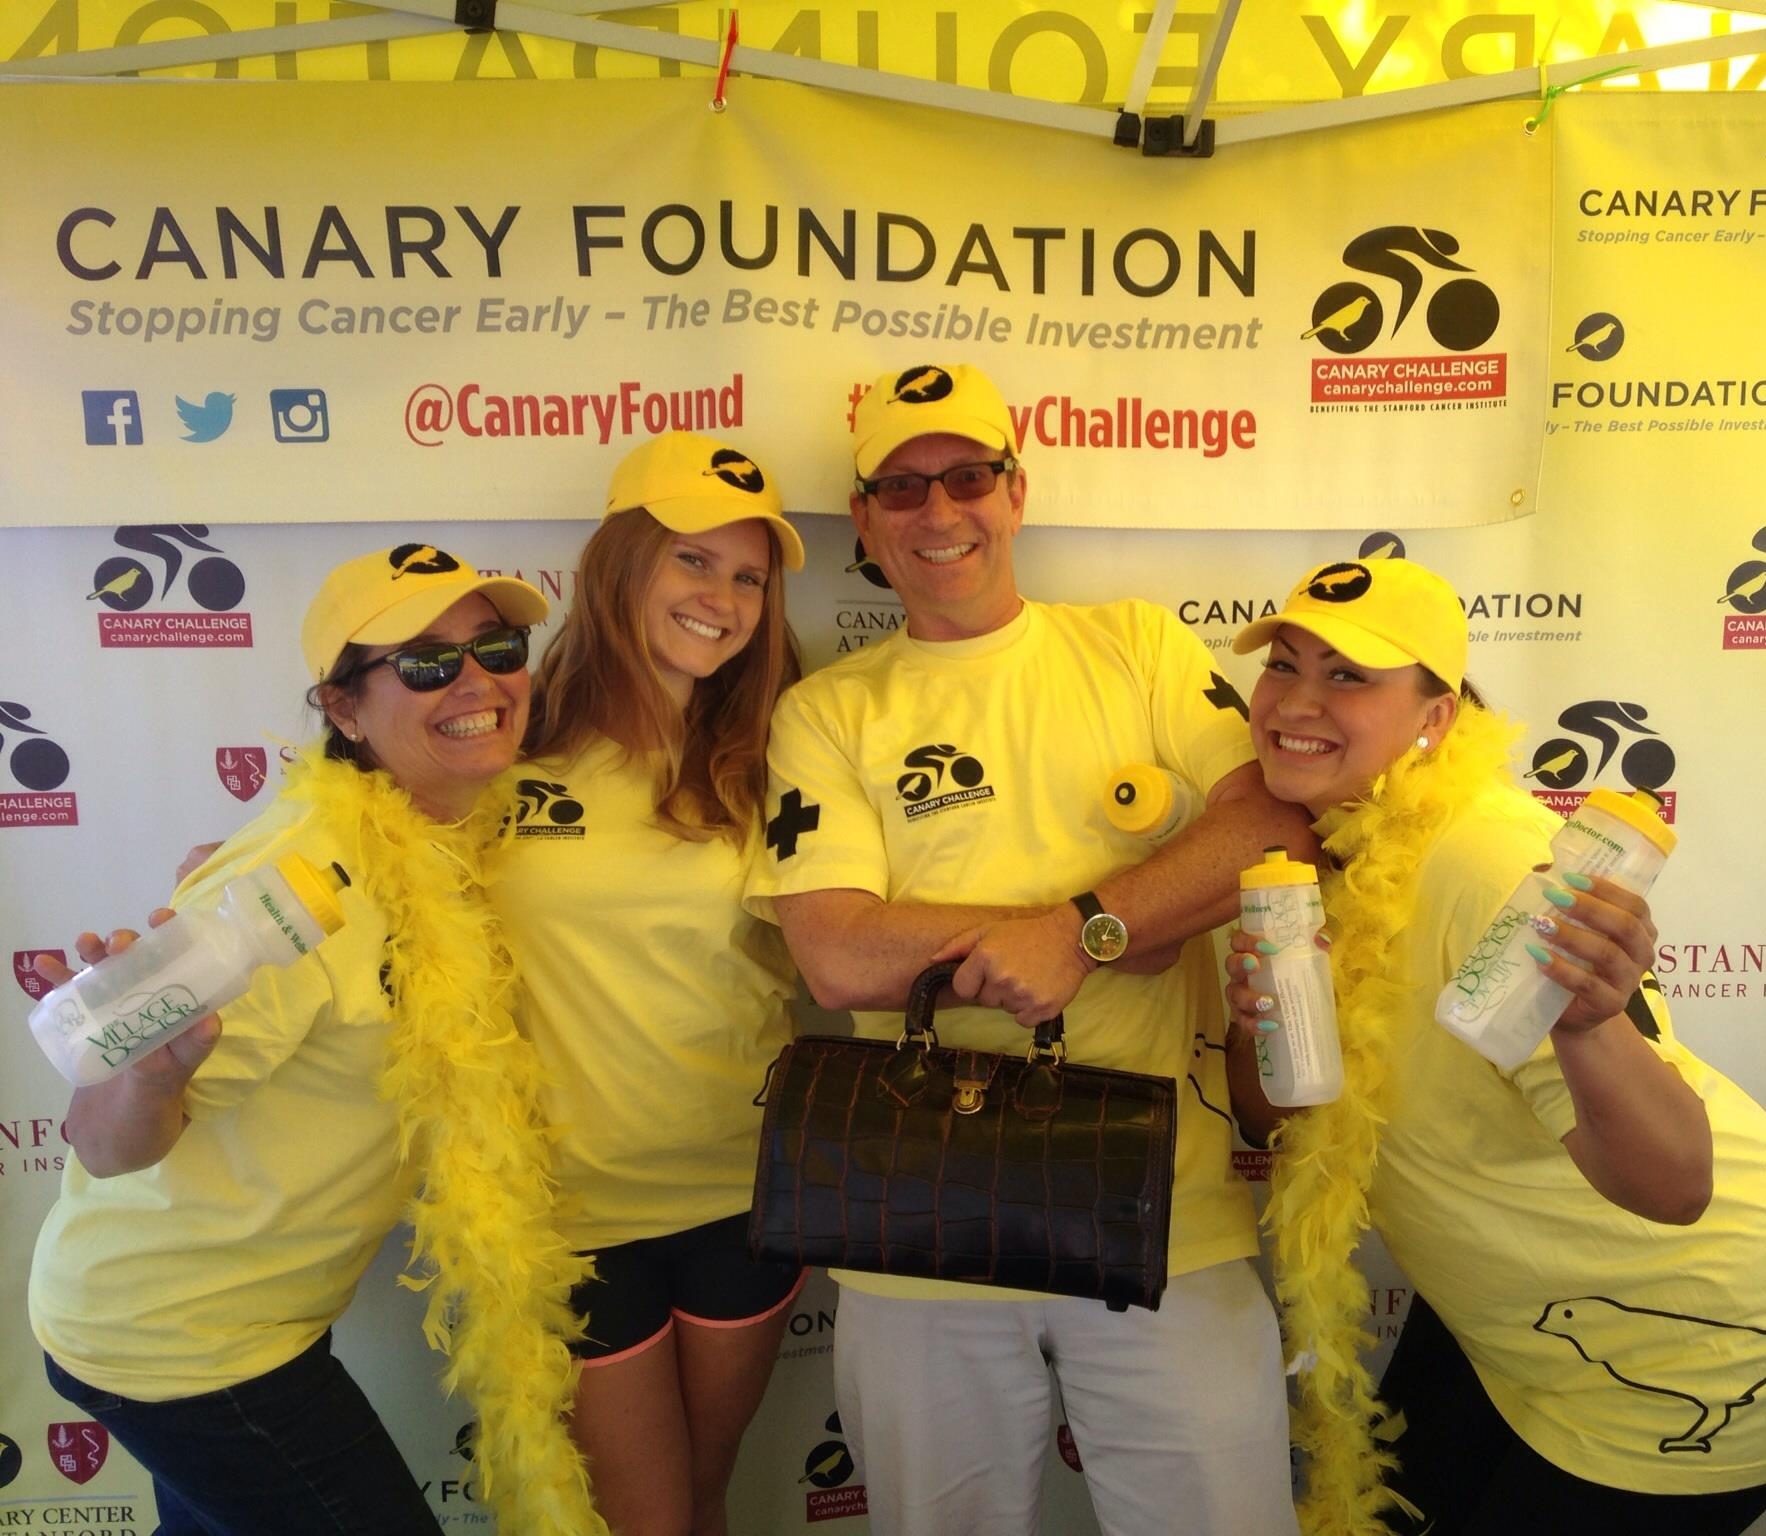 Canary Foundation Stopping Cancer Early